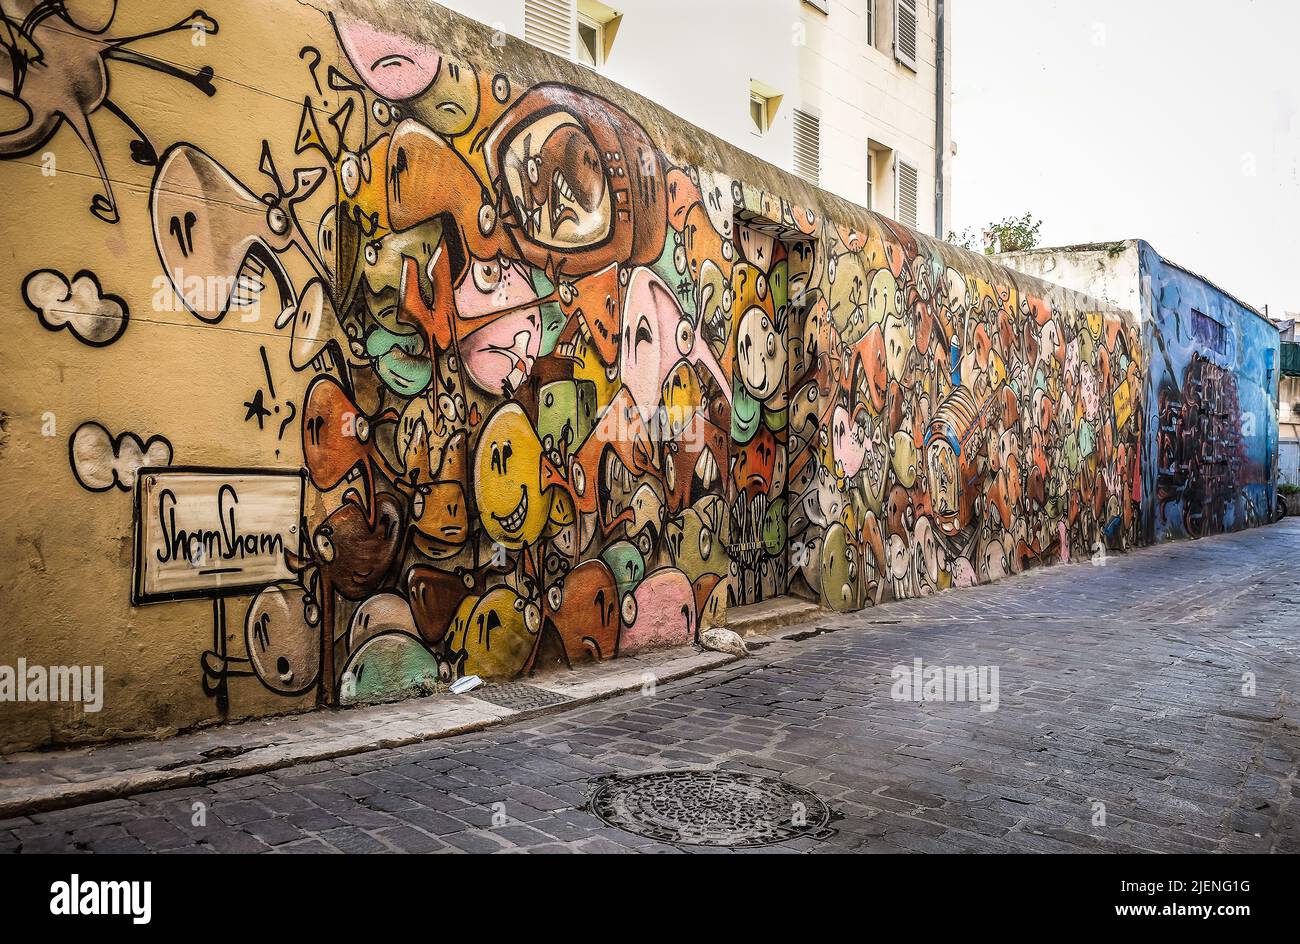 Marseille, France, May 2022, view of a mural by the street artist Shamsham in Le Panier district Stock Photo